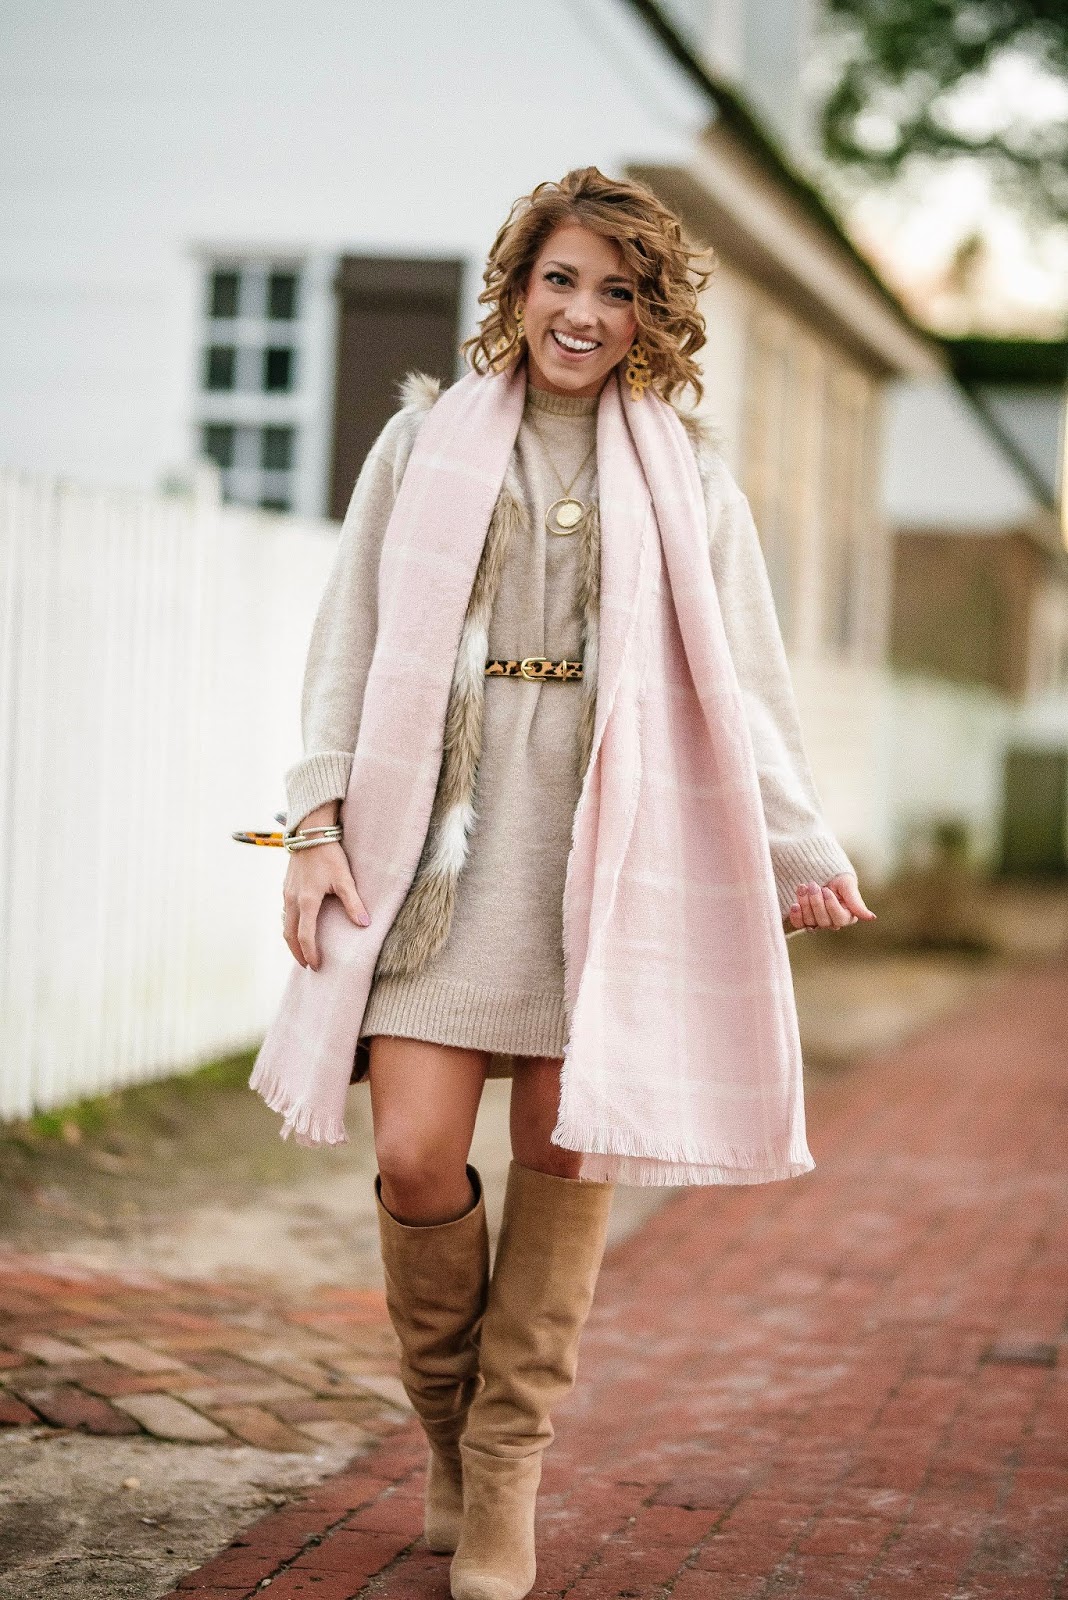 Baby Pink and Faux Fur - Something Delightful Blog